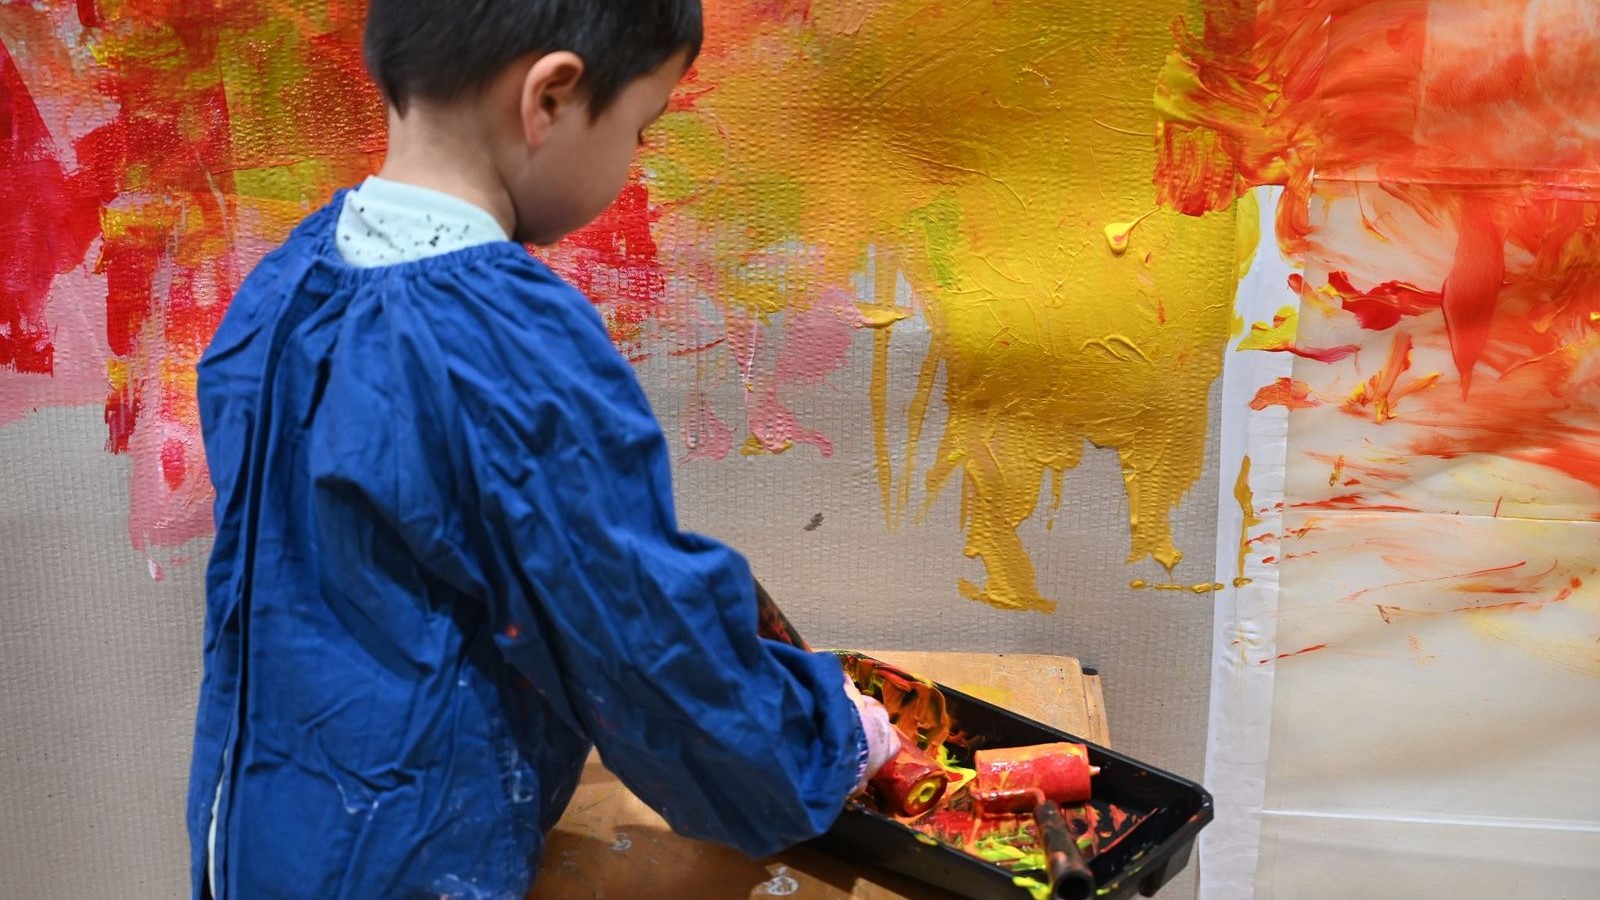 Child using a roller to paint on a canvas in yellow and red.